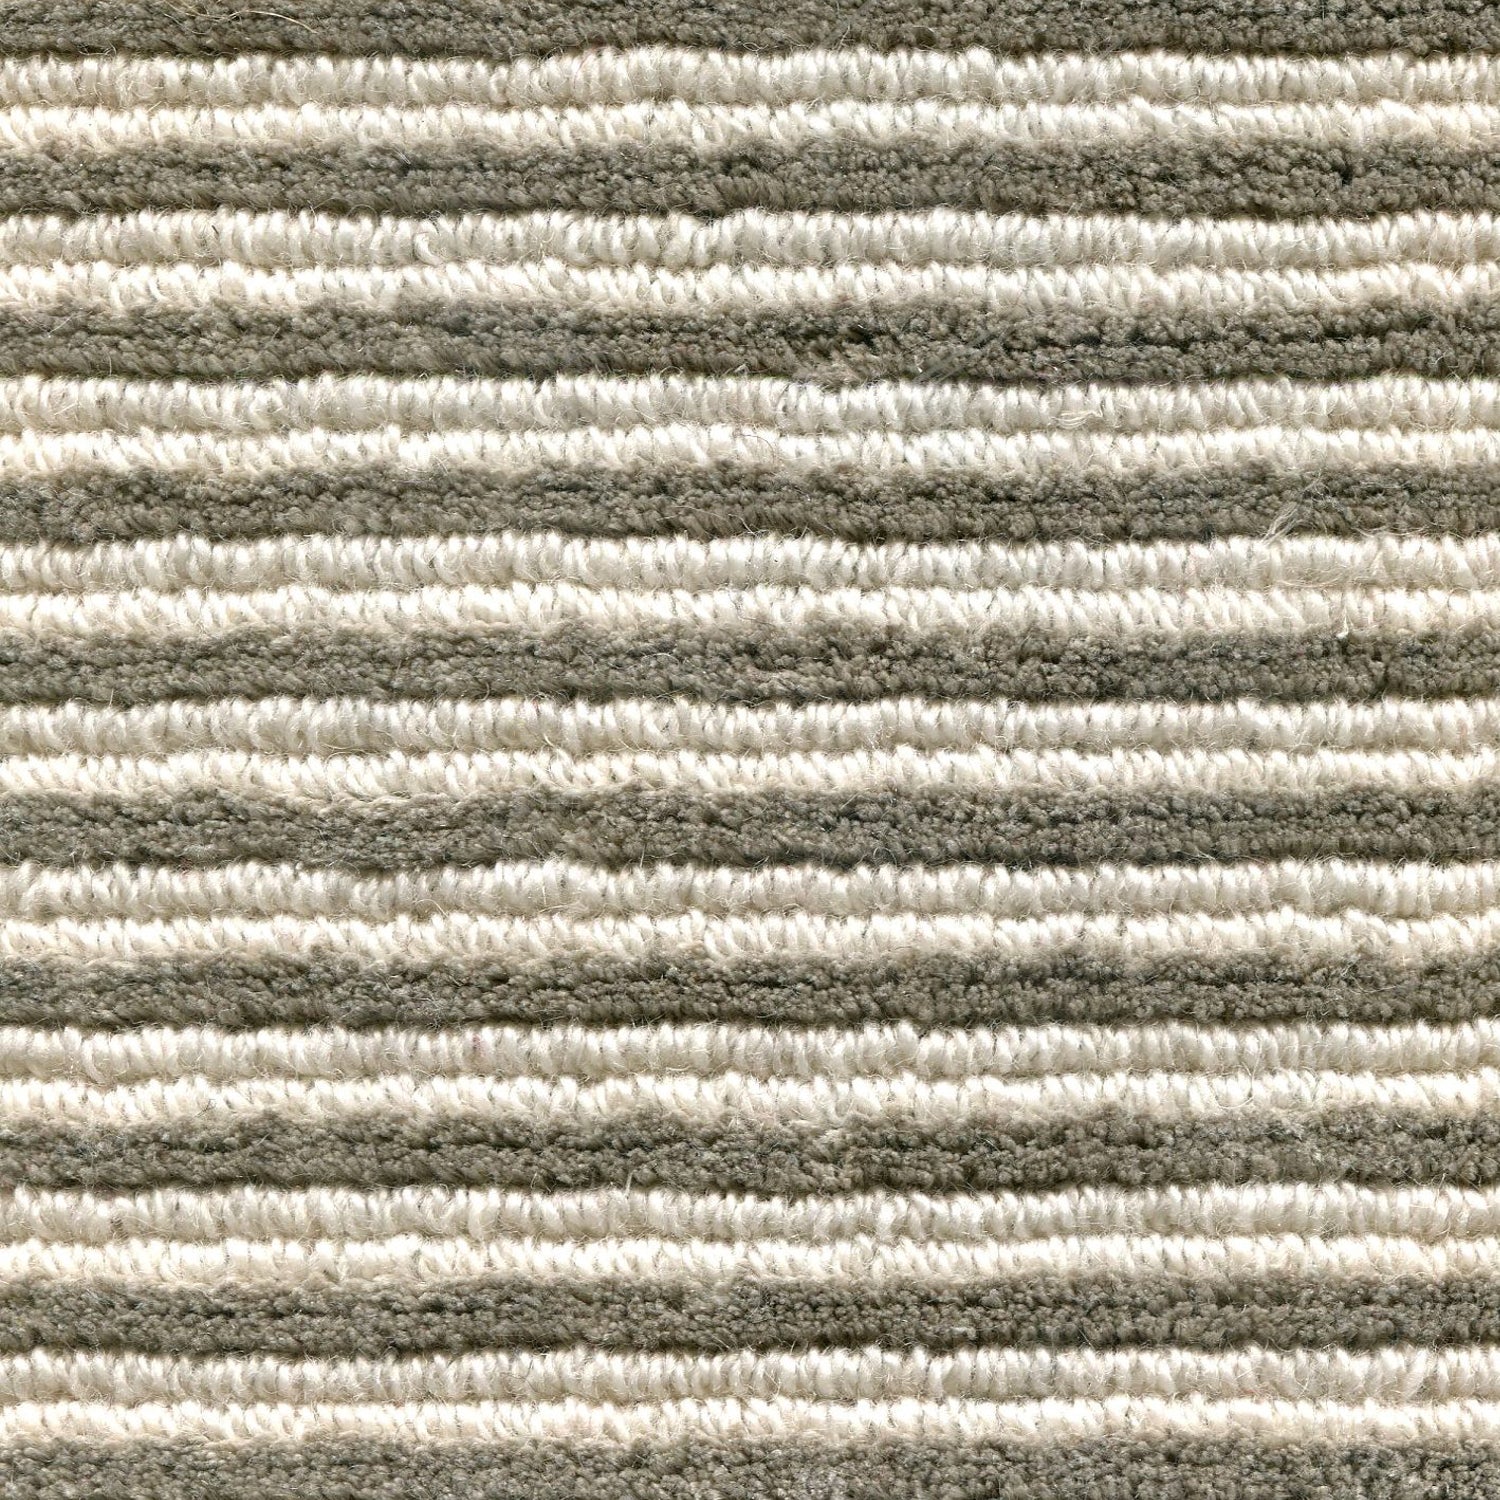 Wool-linen broadloom carpet swatch in a chunky striped weave in white and sage.